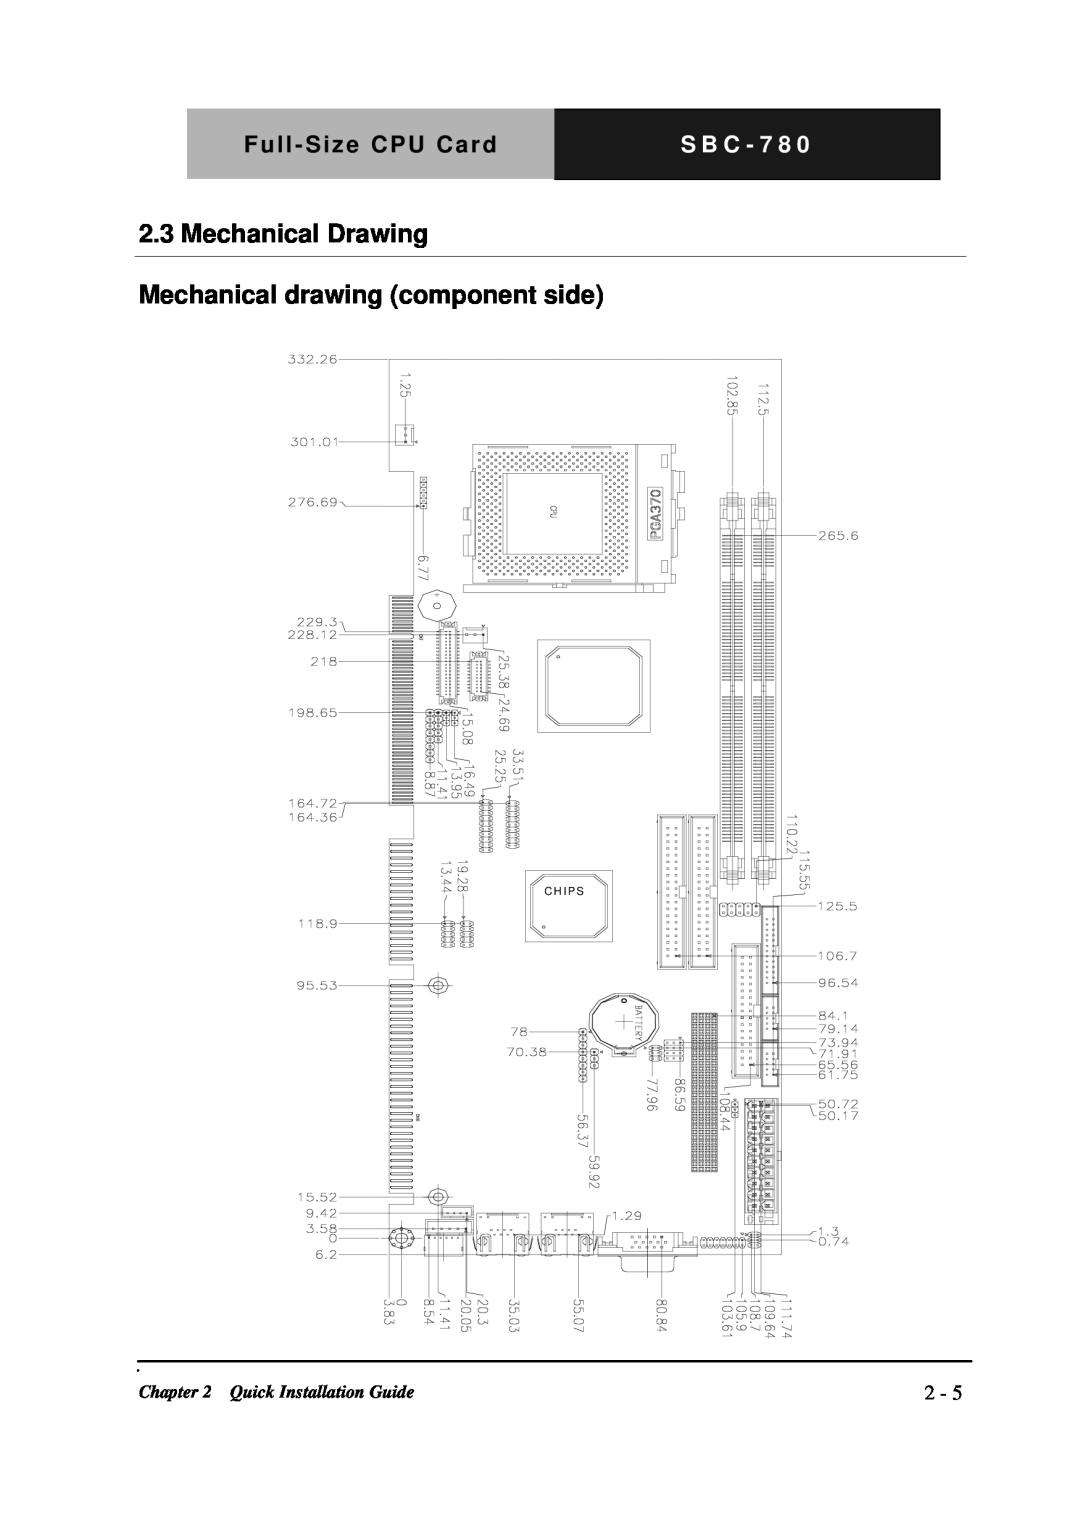 Intel SBC-780 Mechanical Drawing, Mechanical drawing component side, S B C - 7 8, Quick Installation Guide, C H I P S 